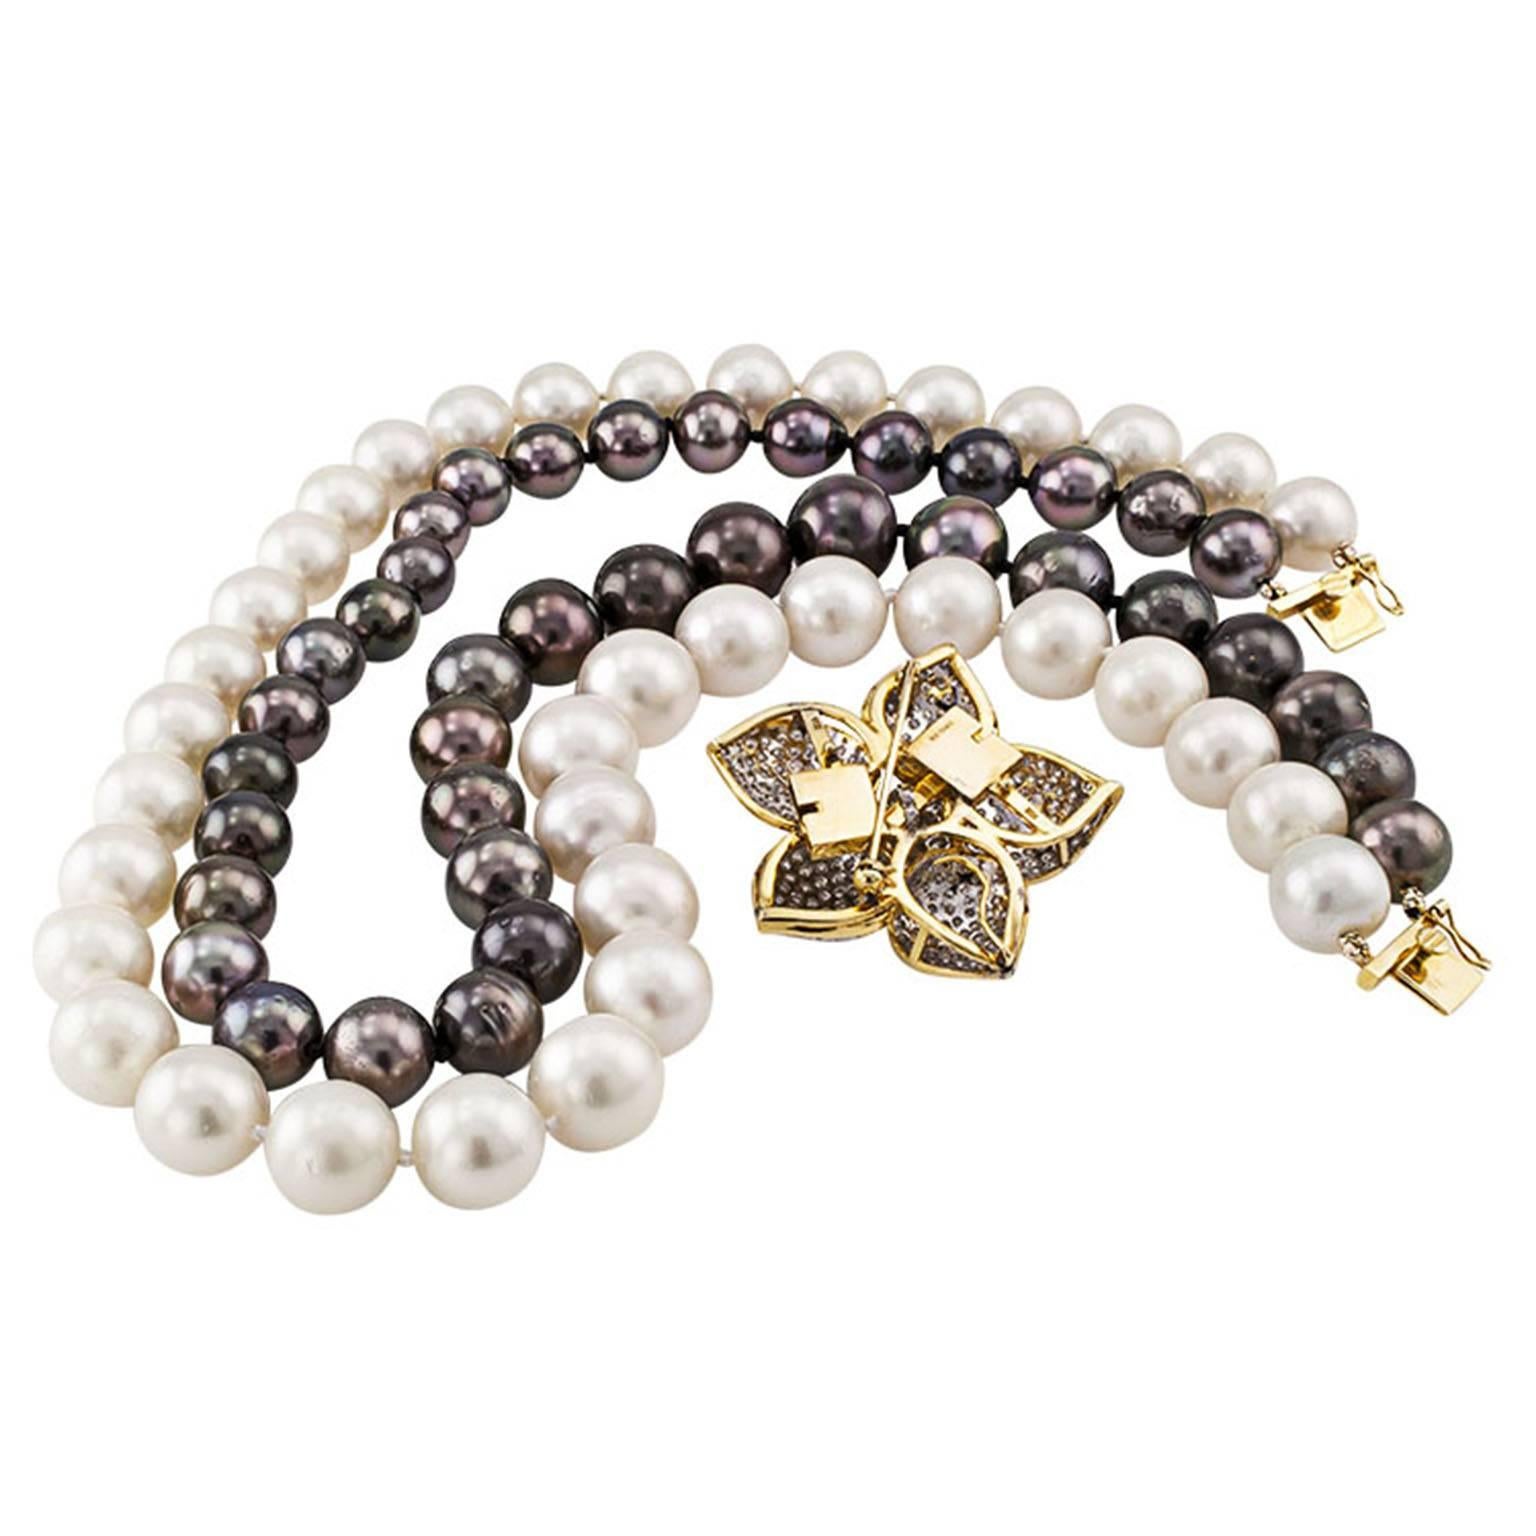 Women's or Men's Tahitian and South Sea Pearl Necklace With Diamond Flower Clasp